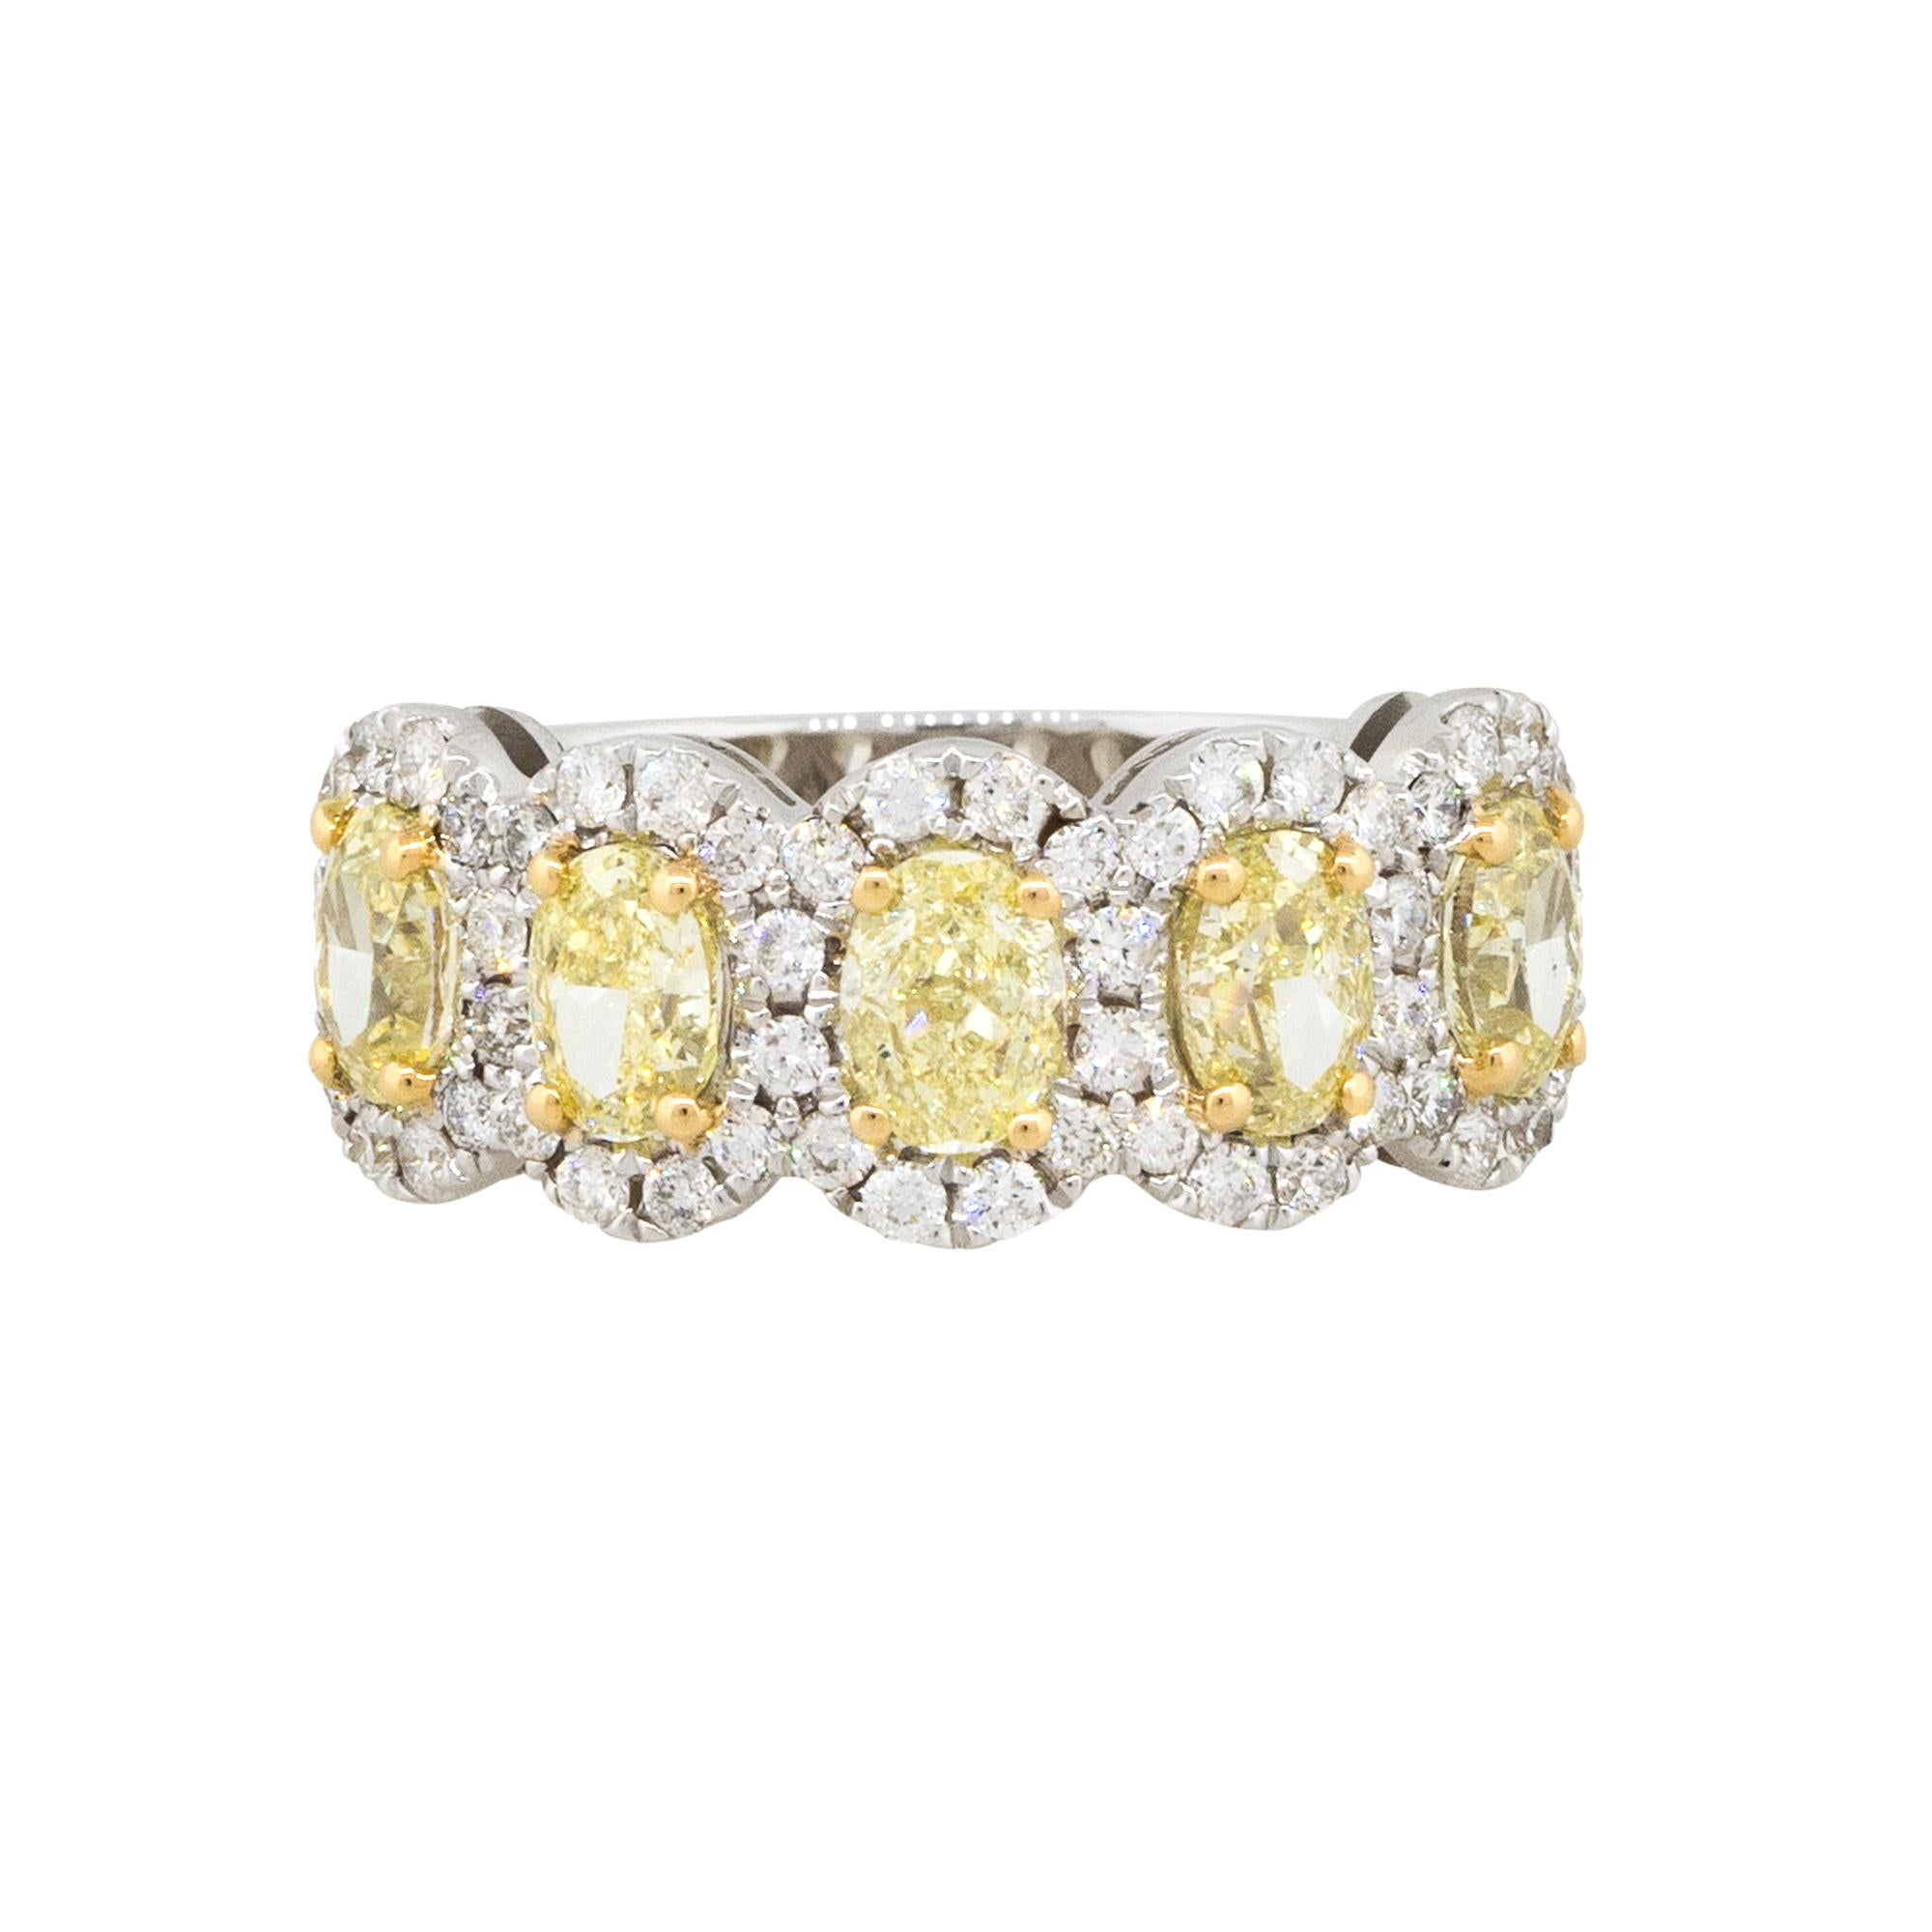 18k White Gold 2.42ctw Five Oval Fancy Yellow Diamond Halo Ring

Style: Women's 5 Diamond Halo Wedding Band
Material: 18k White Gold
Diamond details: Approx. 1.85ctw of Oval cut Diamonds. Diamonds are Fancy Yellow in color and VS in clarity. There